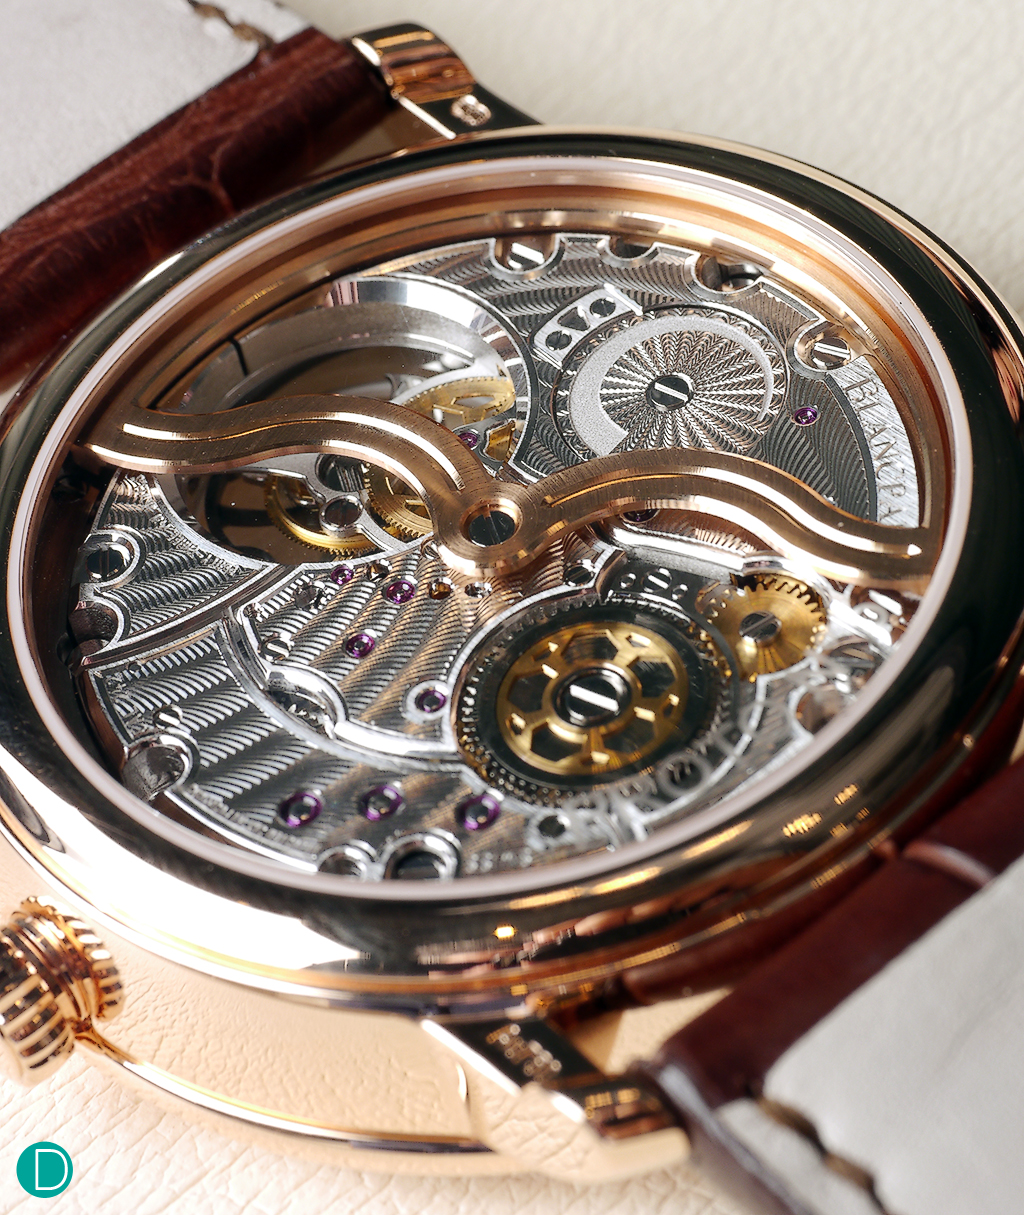 Blancpain caliber 242 flying tourbillon automatic with 12 day power reserve on a single barrel. Note the magnificent finishing details like the hand-guilloché on the plates.